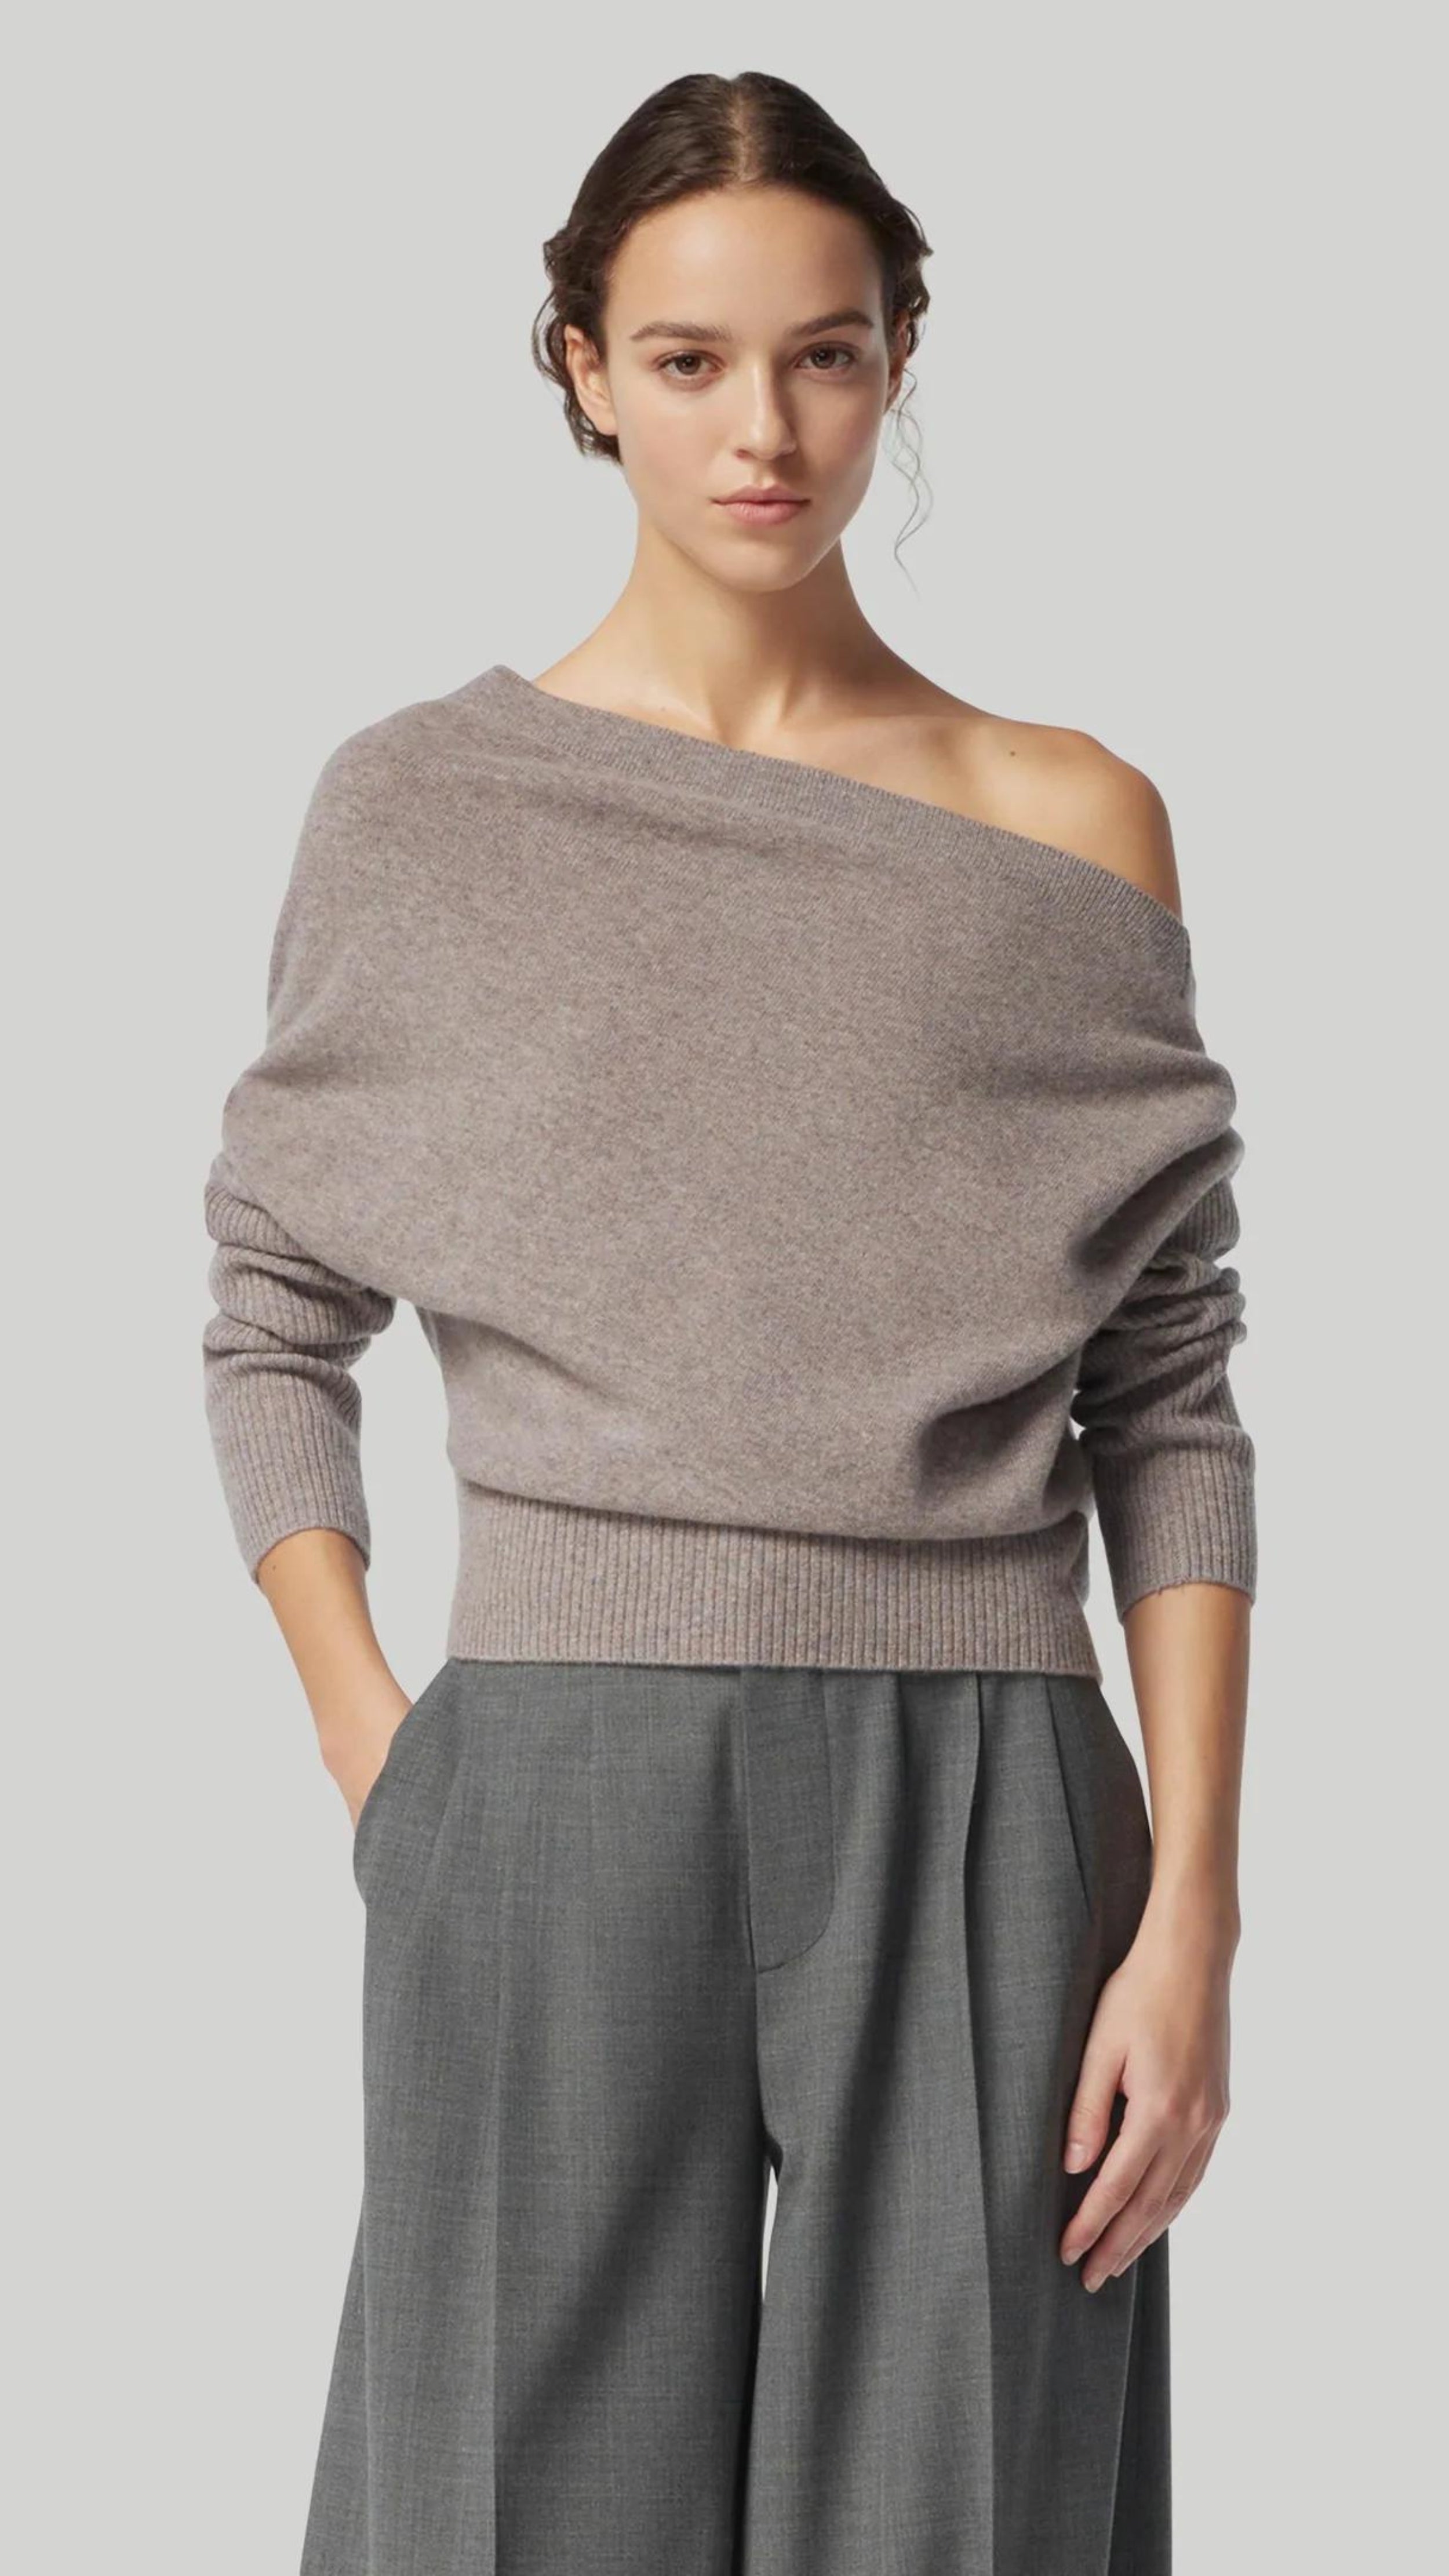 Altuzarra Paxi Cashmere Sweater in Grey. Luxury soft knit jumper in light gray, off the shoulder style. With a fitted waist line and sleeves for an elegantly casual look. Shown on model facing front 